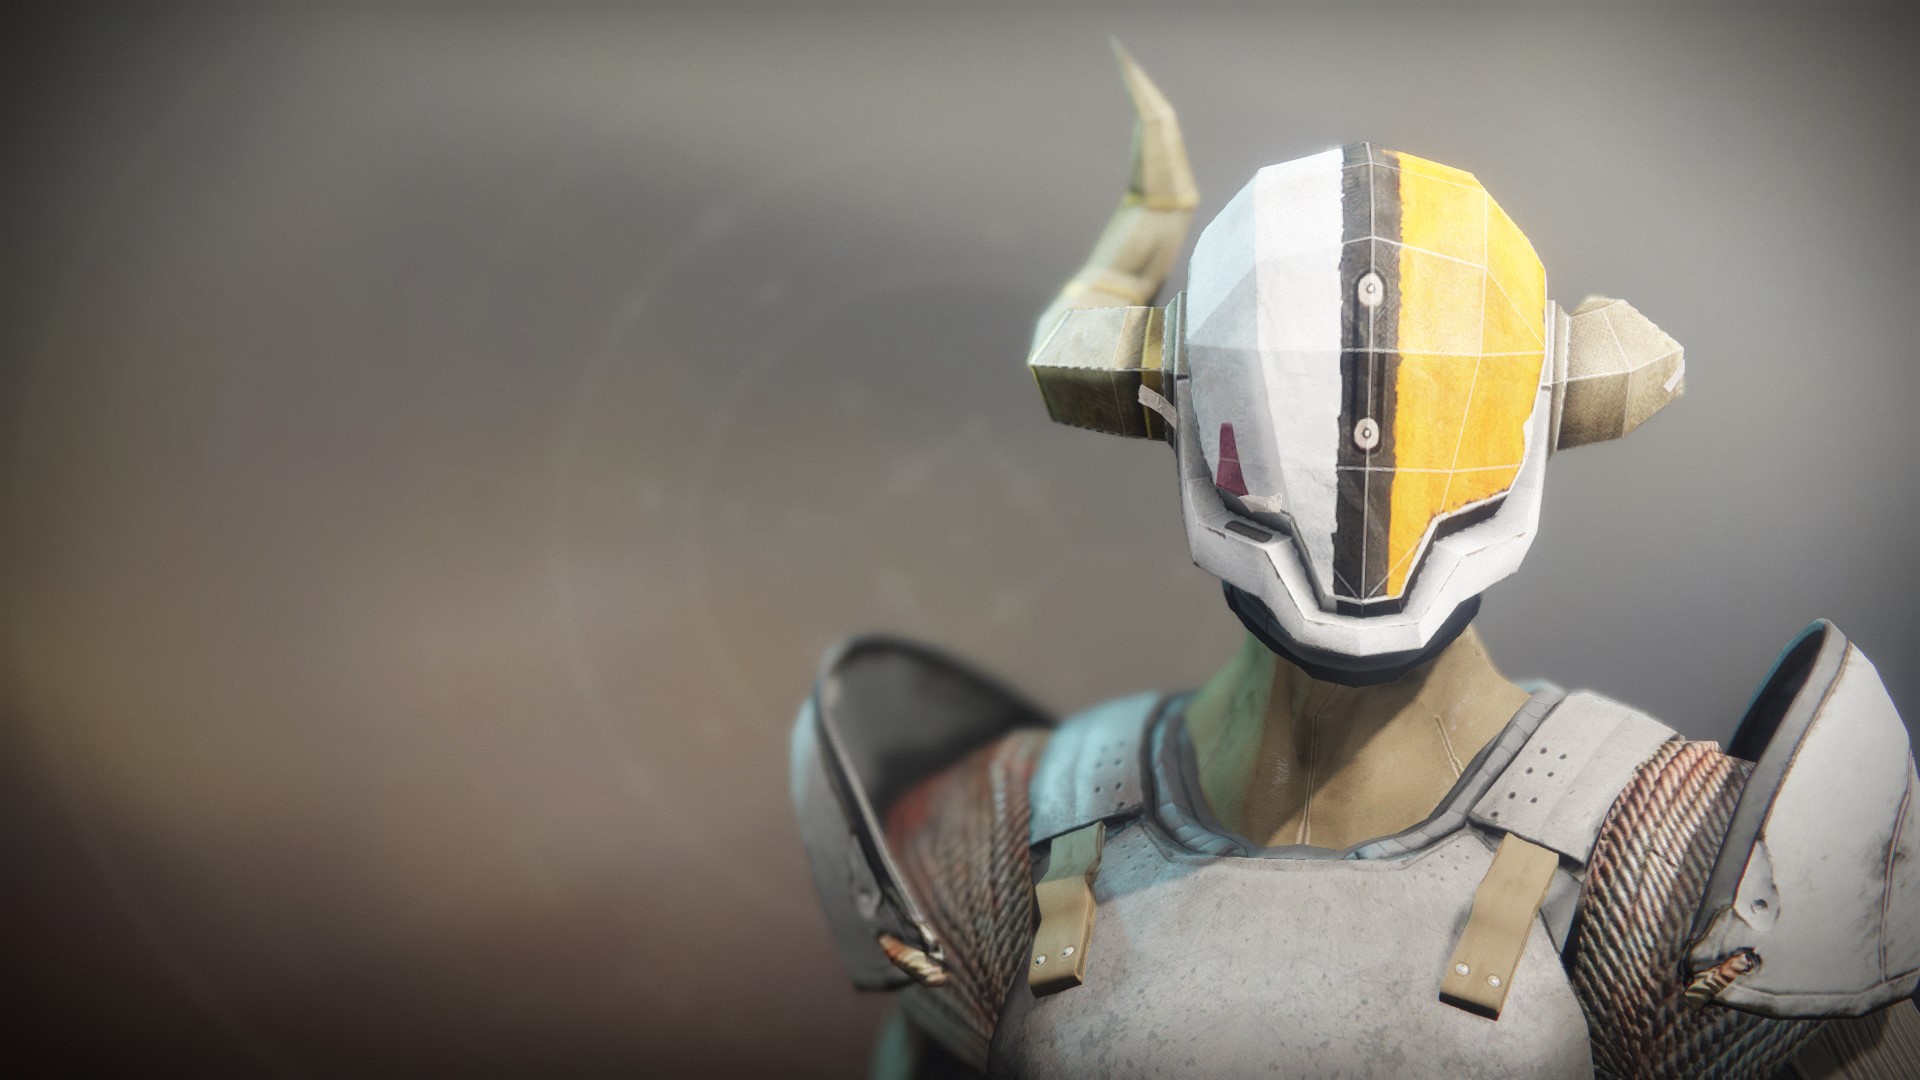 An in-game render of the Lord Shaxx Mask.